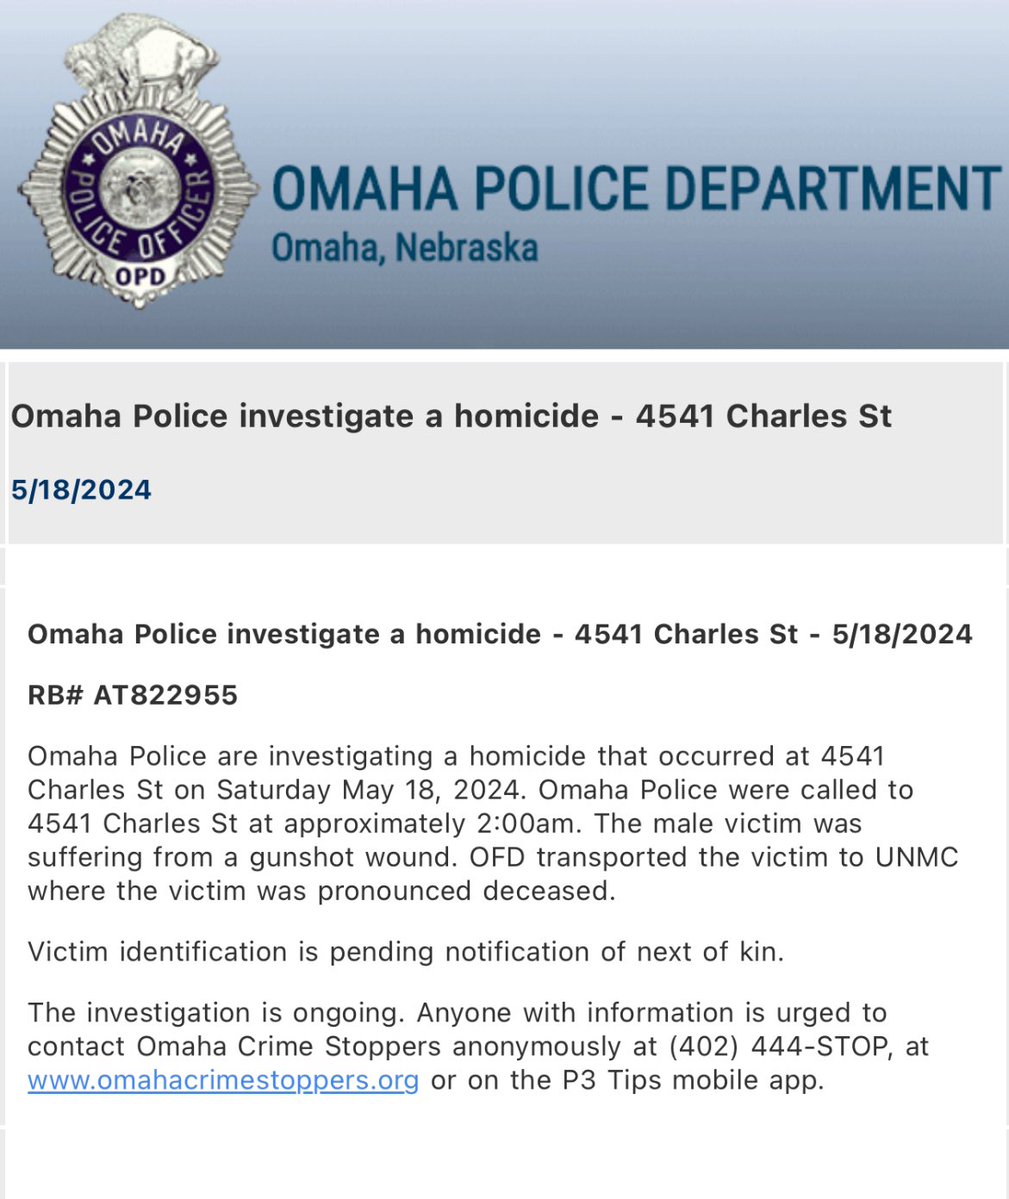 .@OmahaPolice investigating a Saturday morning homicide at 4541 Charles St. At approximately 2 am, OPD and OFD were called for a male suffering a gunshot wound. OFD transported the male to UNMC where he was pronounced deceased.